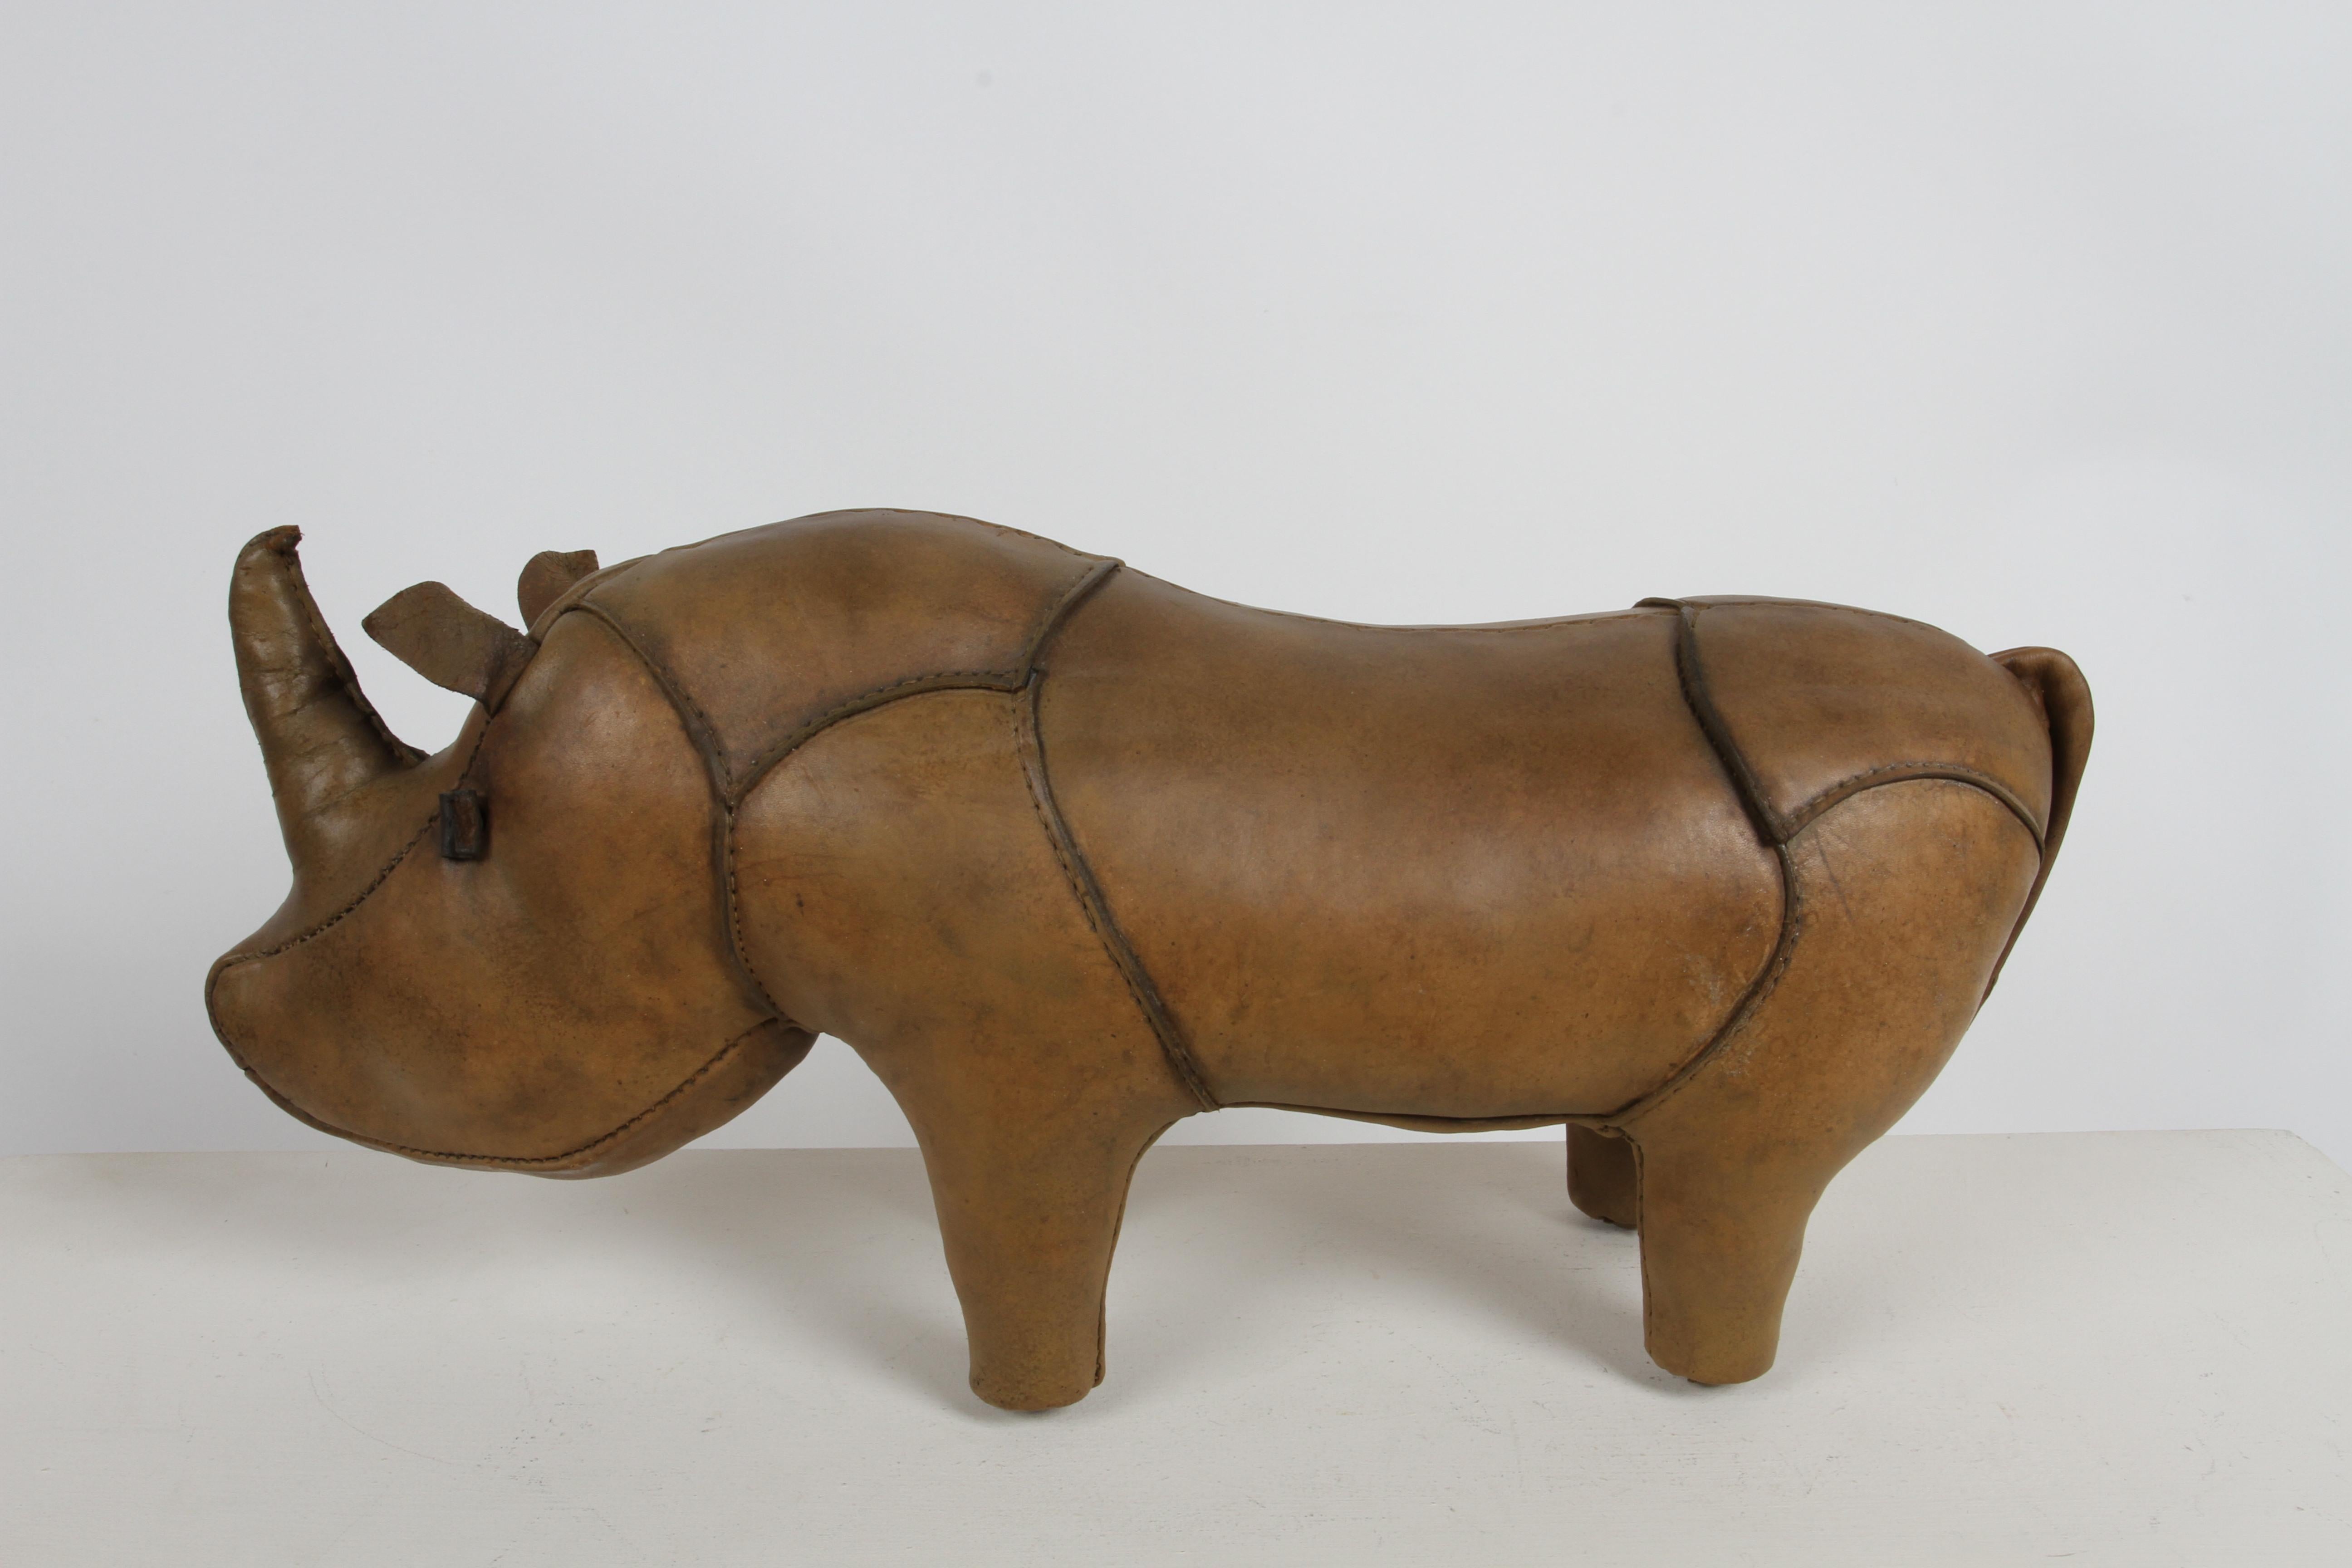 Early Vintage 1960s leather ottoman / sculpture in form of Rhino, made by Omersa and was retailed by Abercrombie & Fitch. This rhino has been refurbished, including new Omersa factory replacement tail, which is very common. Work done by the leading